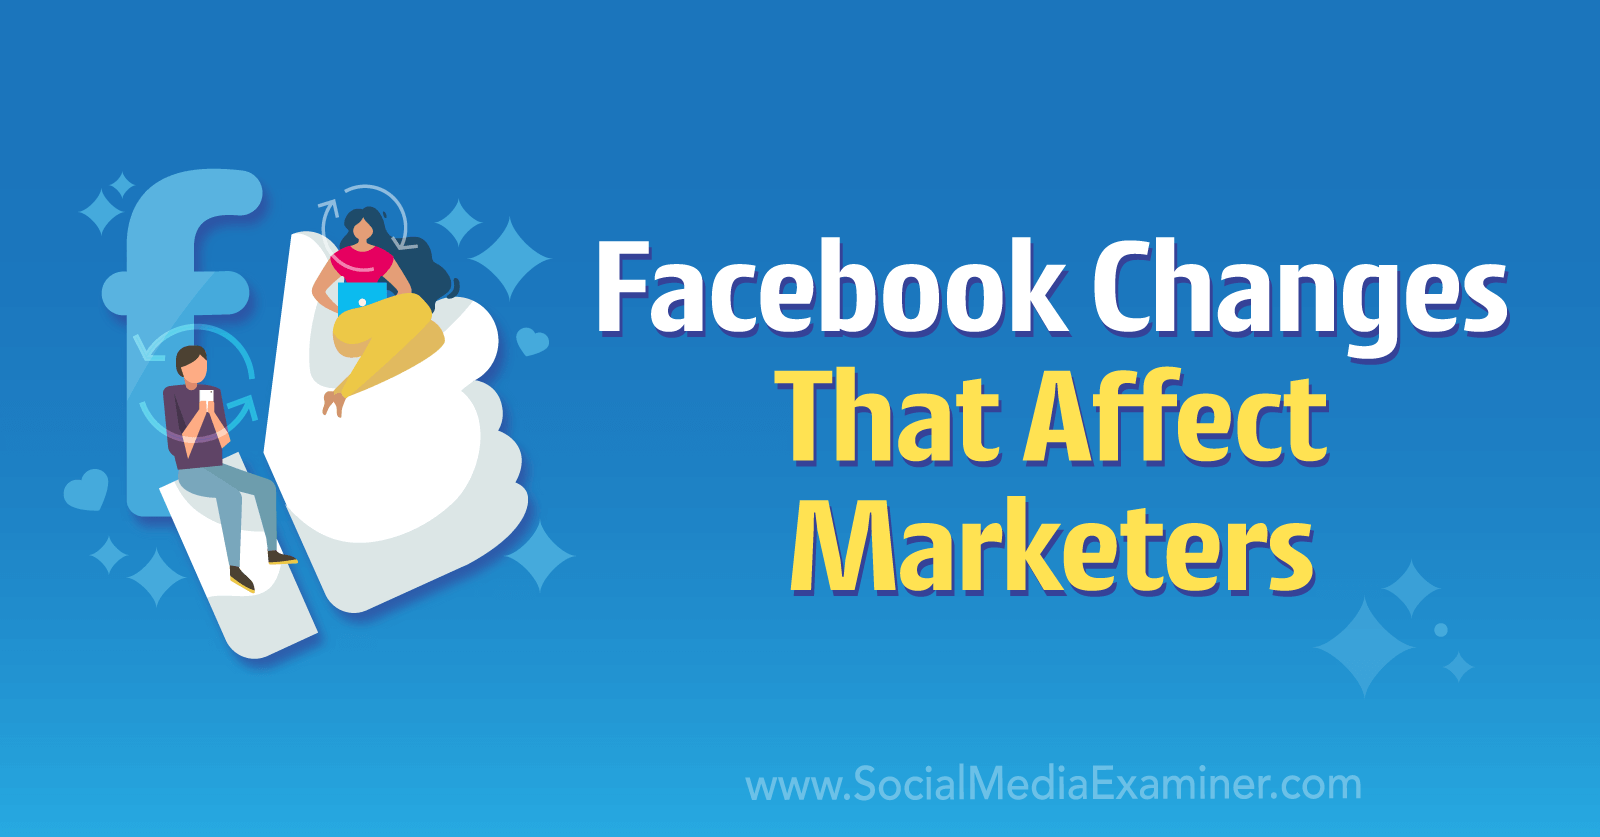 Facebook Changes That Affect Marketers by Social Media Examiner